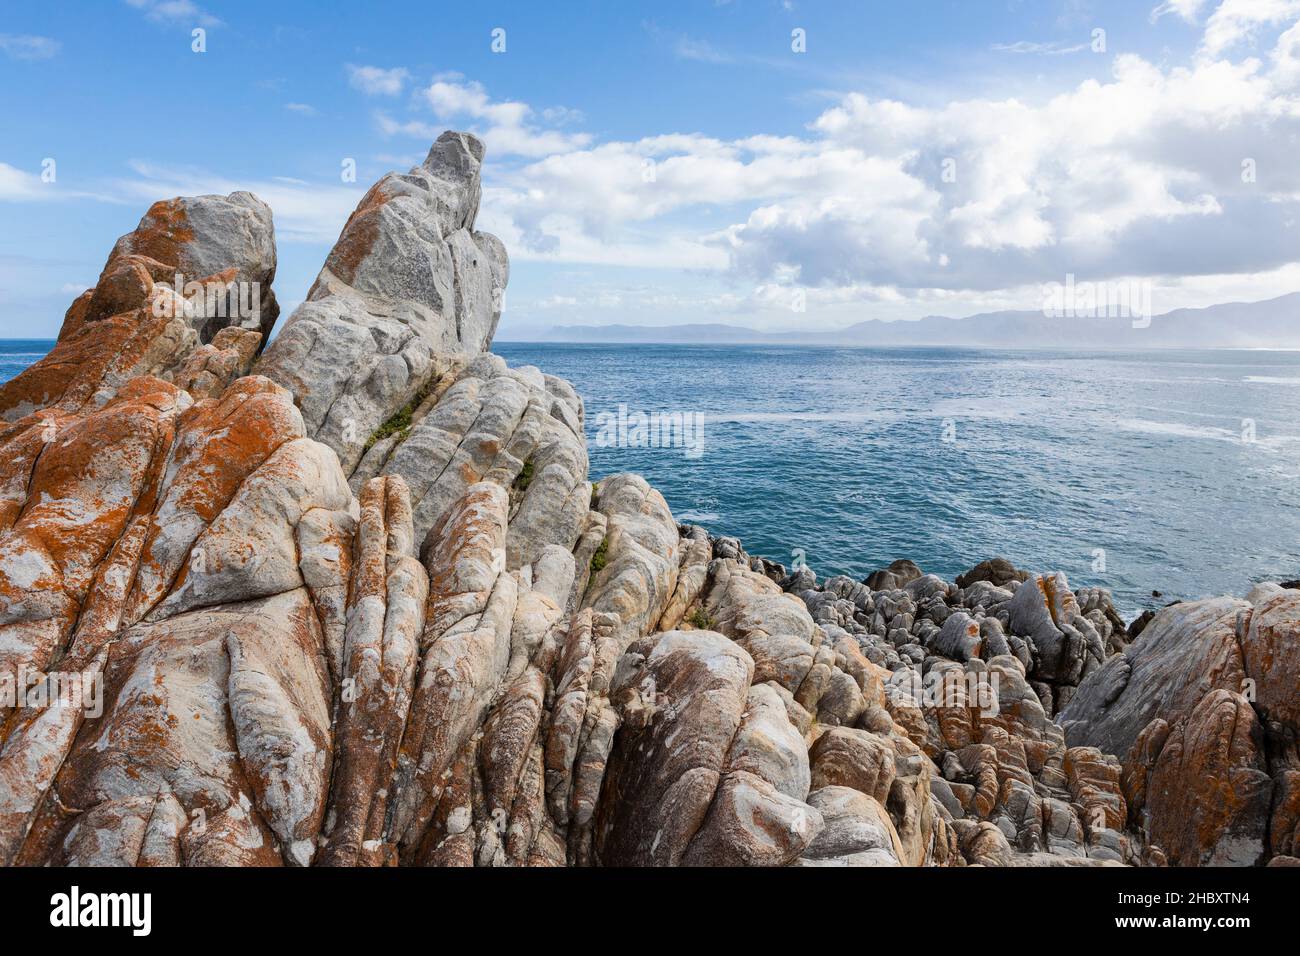 Jagged rocks on the Atlantic coast, waves on the water surface. Stock Photo